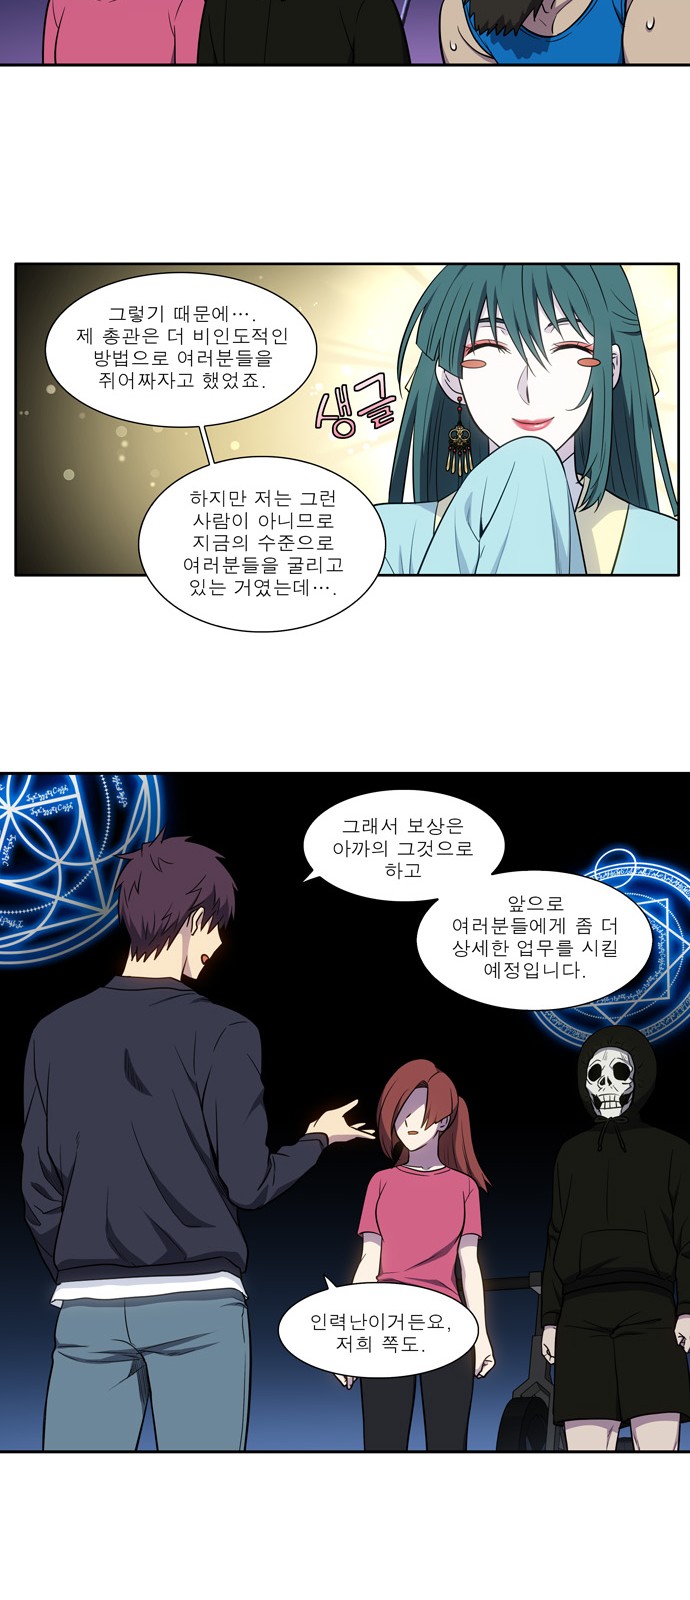 The Gamer - Chapter 433 - Page 19